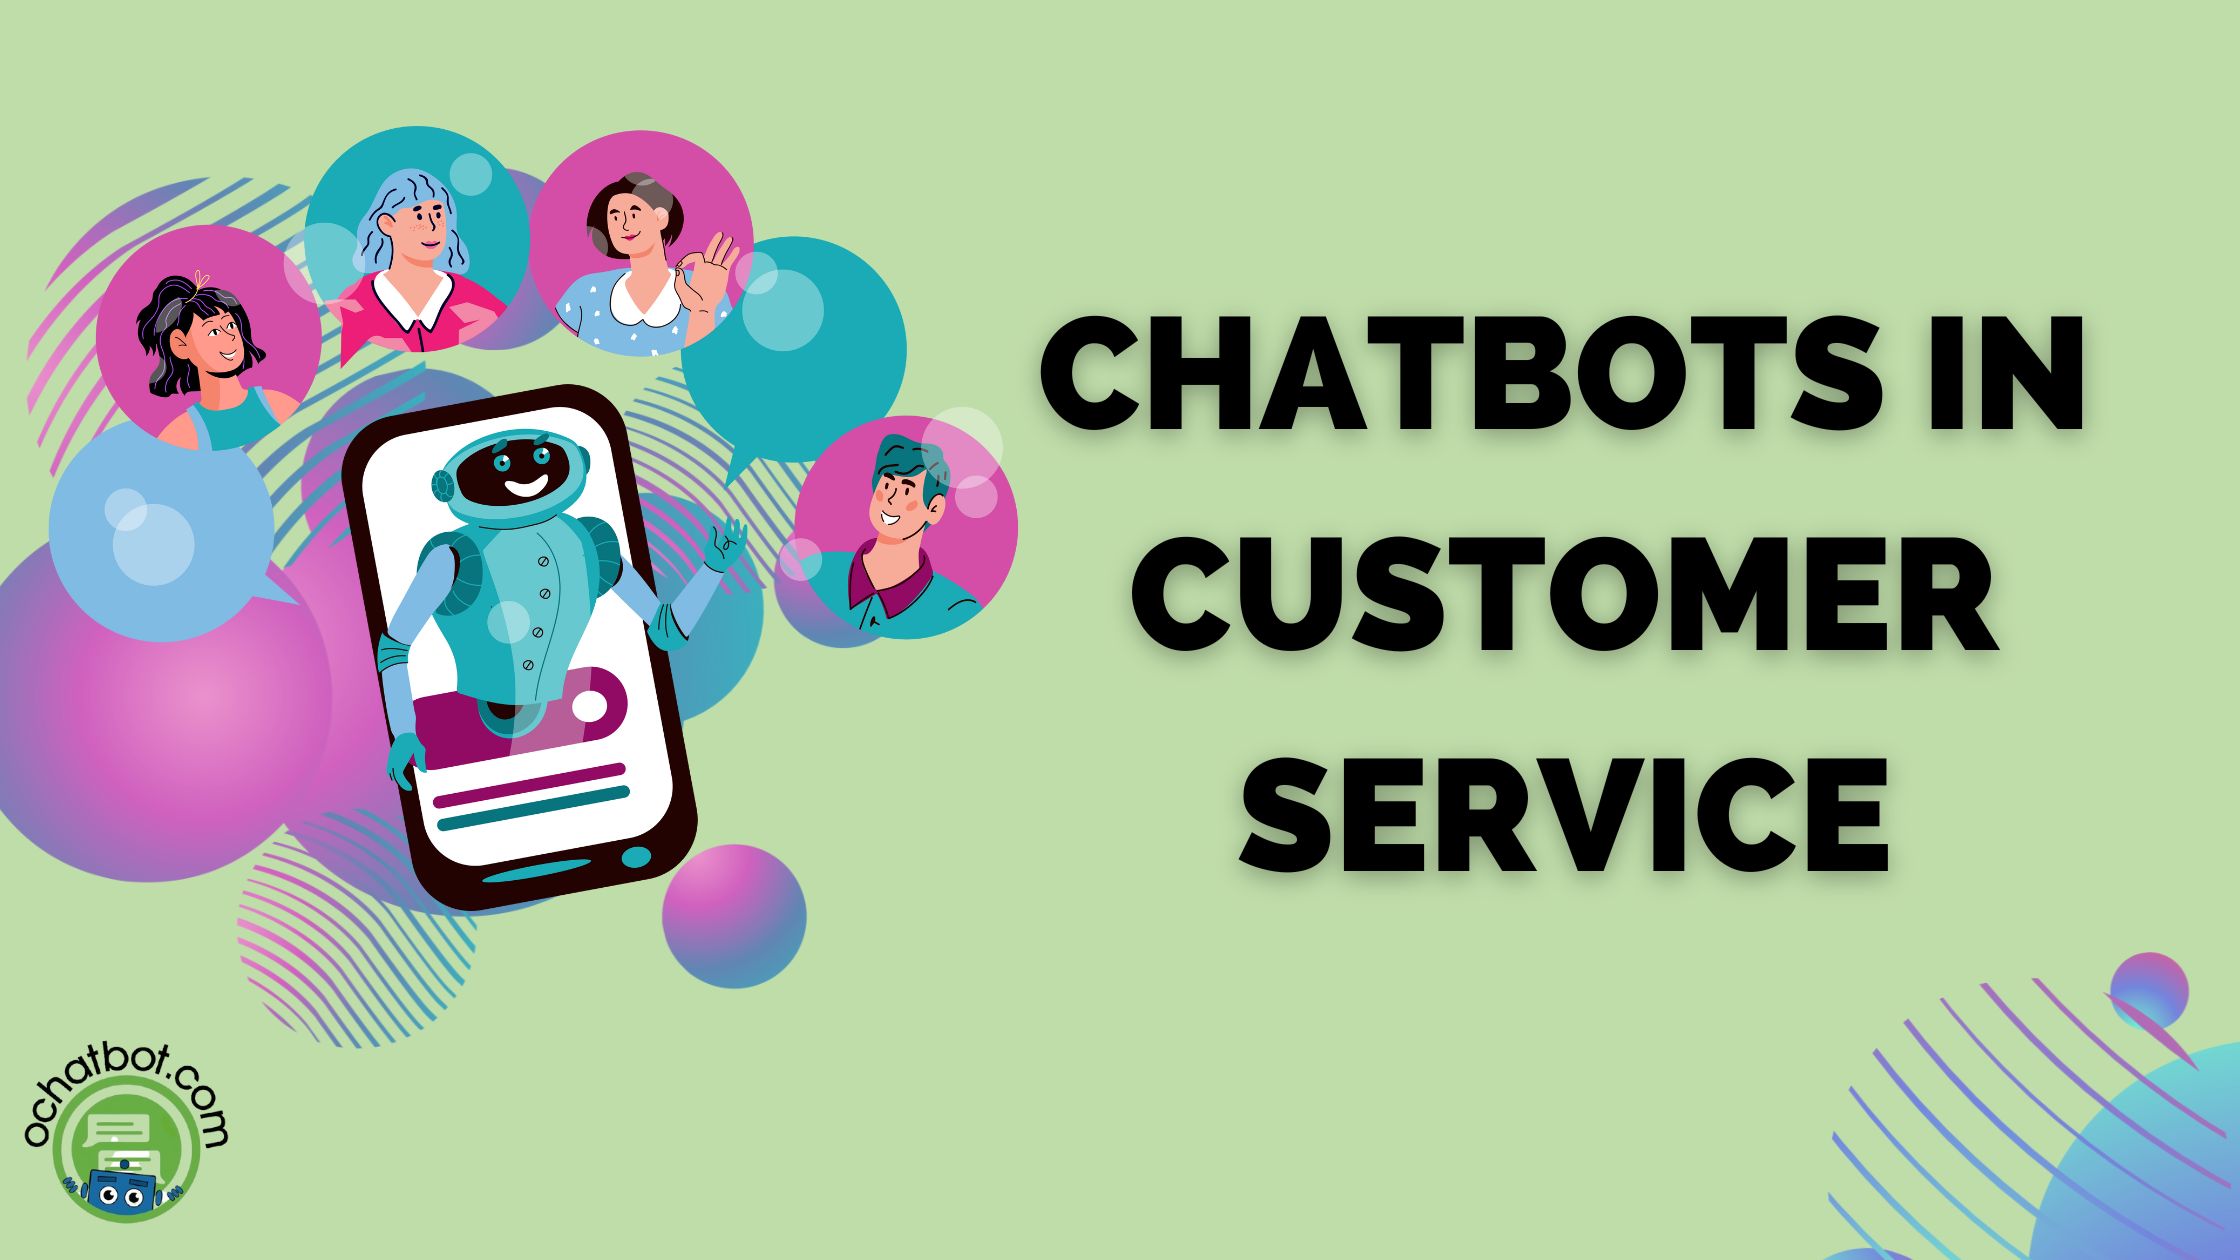 chatbot in customer service